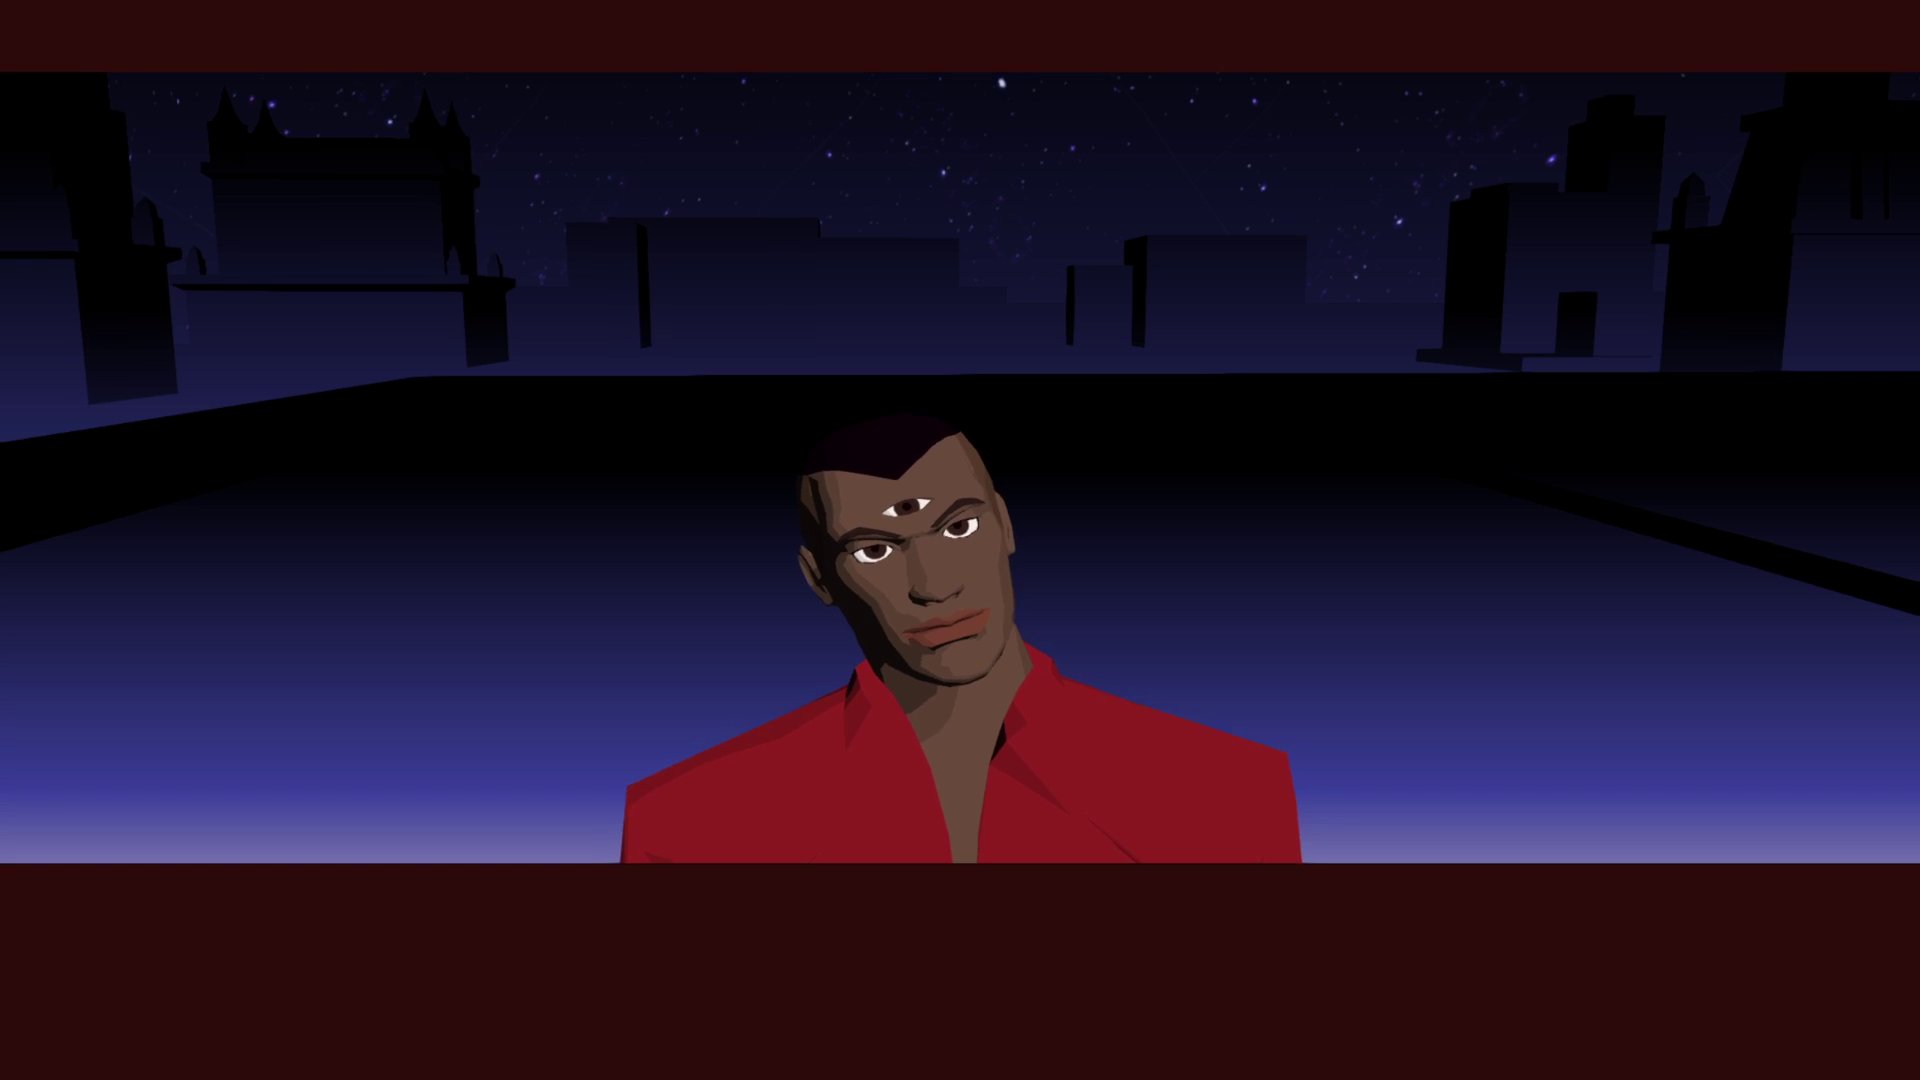 Screenshot of "Smile." Emir, a teenager, on the roof of the Union Hotel at night. he is smiling and has a third eye open on his forehead. He wears a red shirt and is visible from the shoulders up. The background is a cityscape rendered in black lines on a minimal purple gradient.